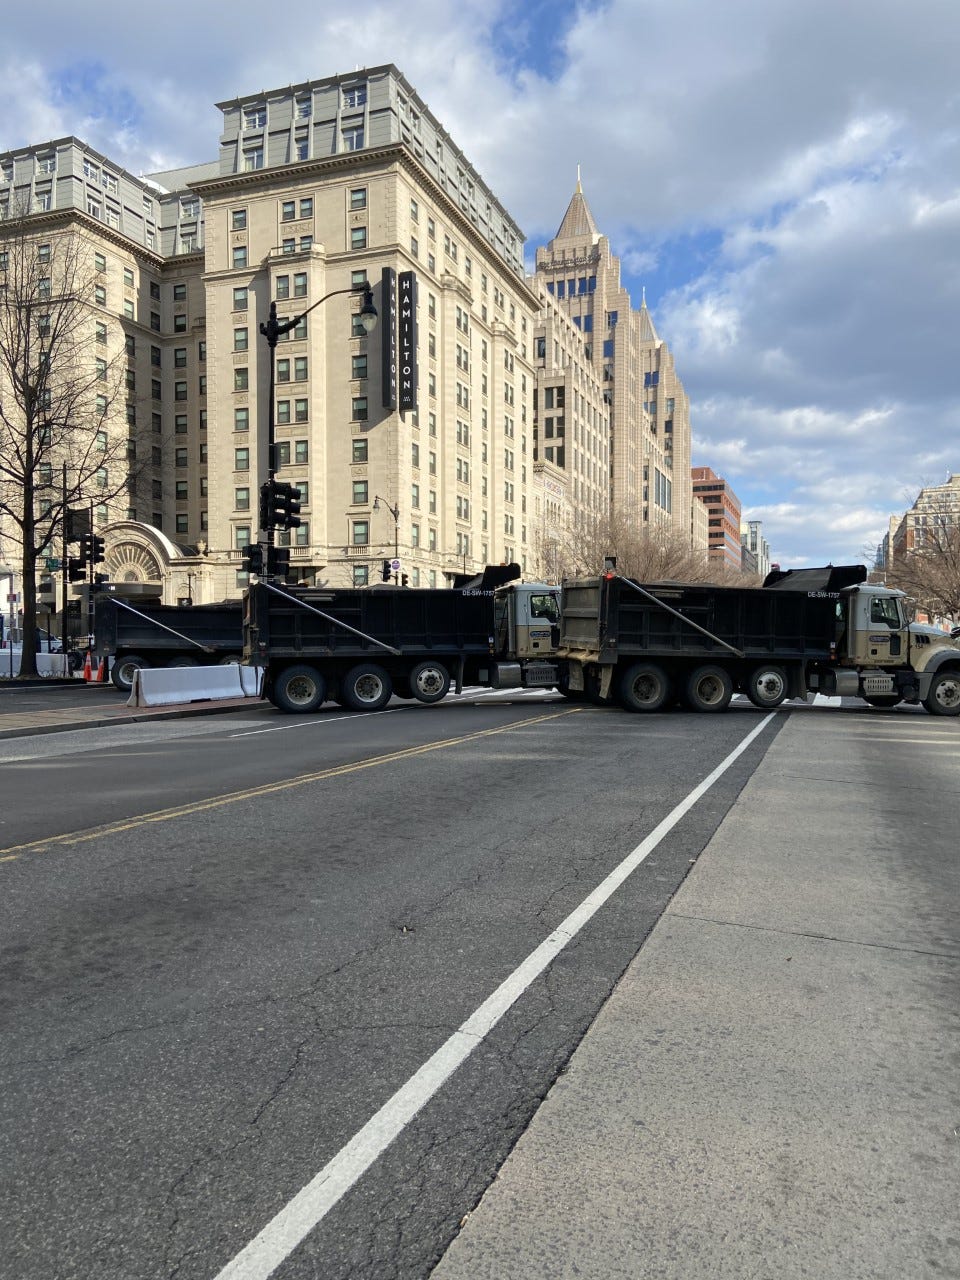 Throughout Inauguration Day, much of downtown Washington, D.C. was eerily quiet. Most of the streets near the White House and Capitol were closed down, often blocked by trucks or humvees.